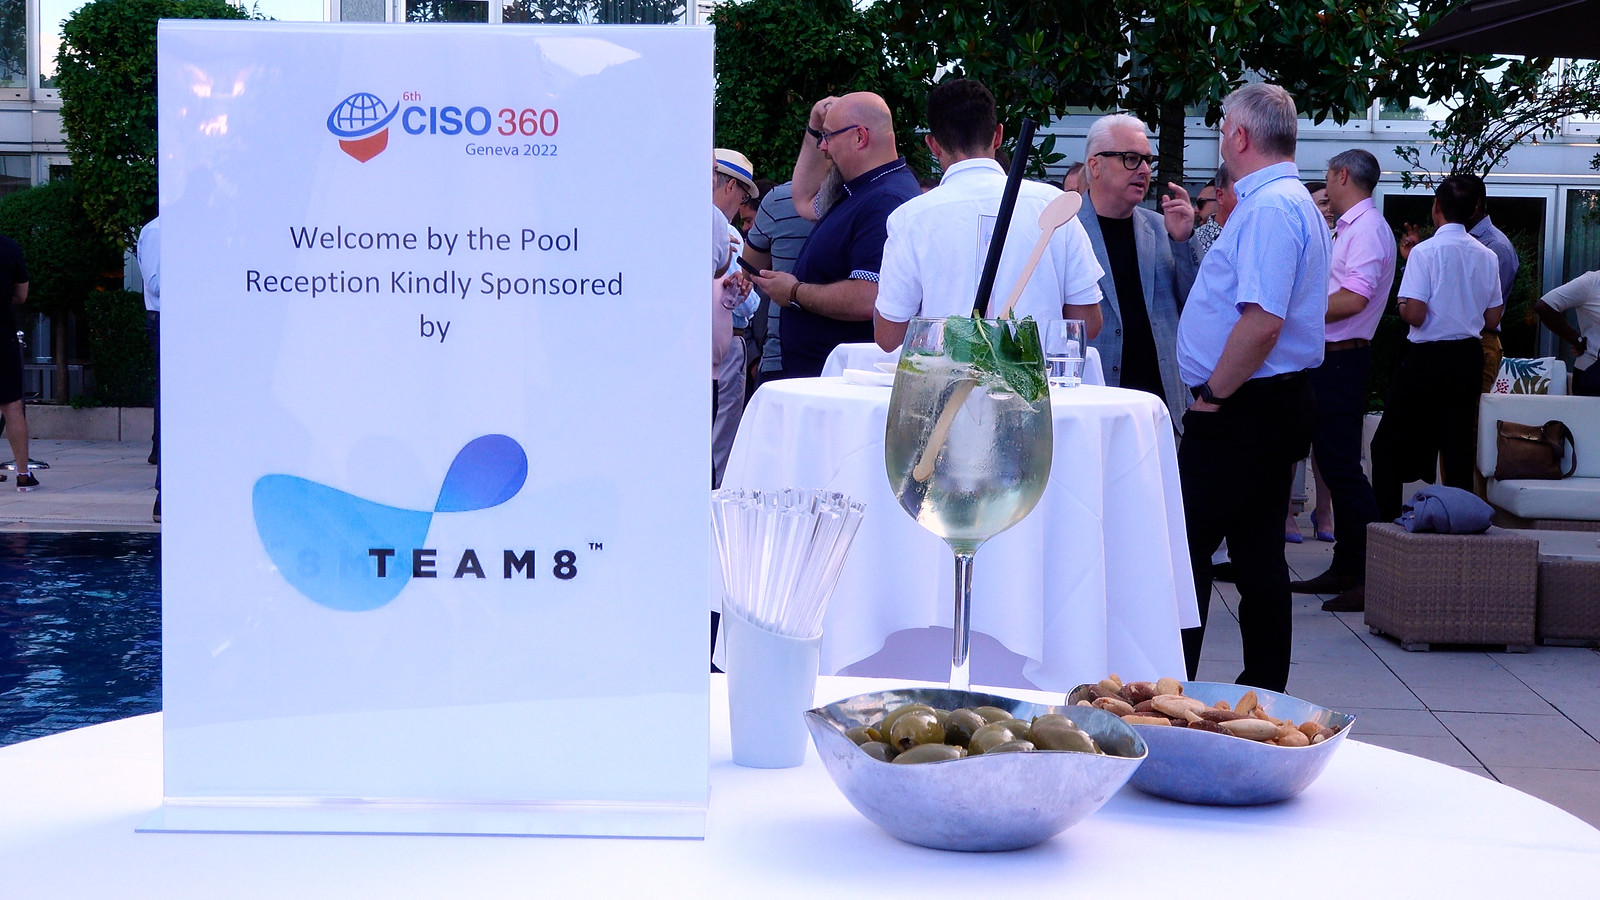 6th CISO 360 Congress - Welcome By the Pool Reception, Tuesday 5th July 2022